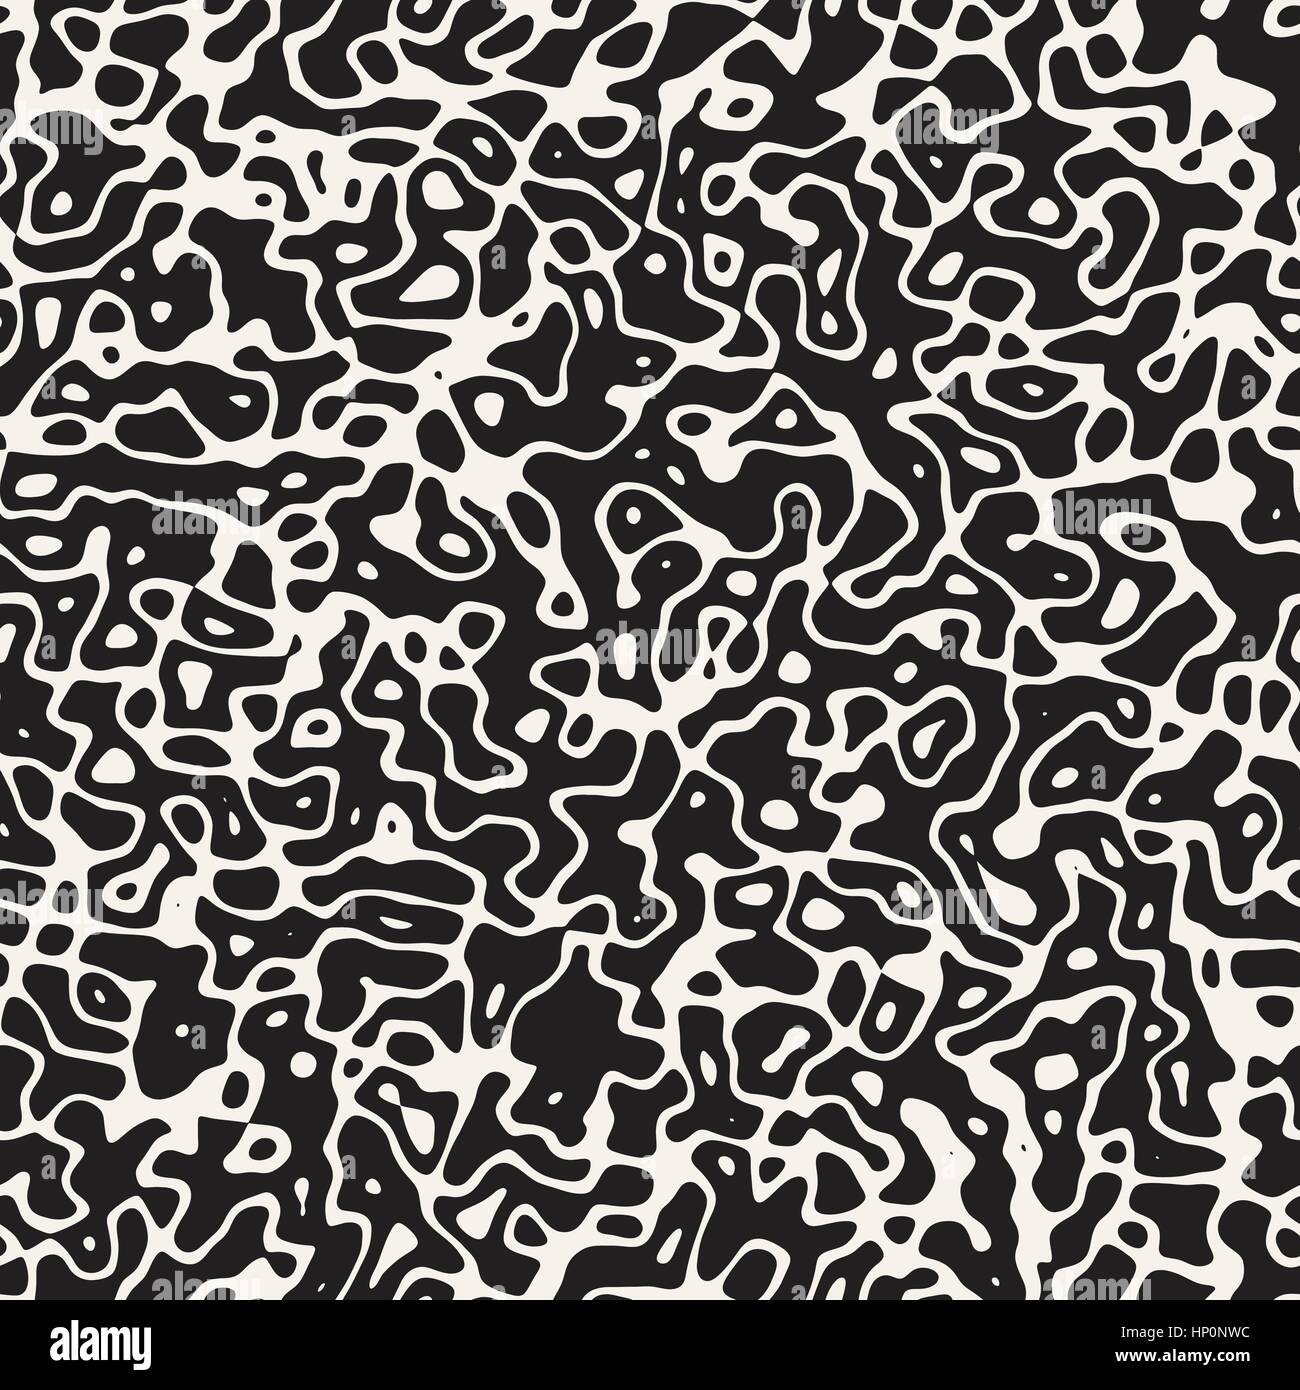 Retro Grungy Noise Texture. Vector Seamless Black and White Pattern Stock Vector